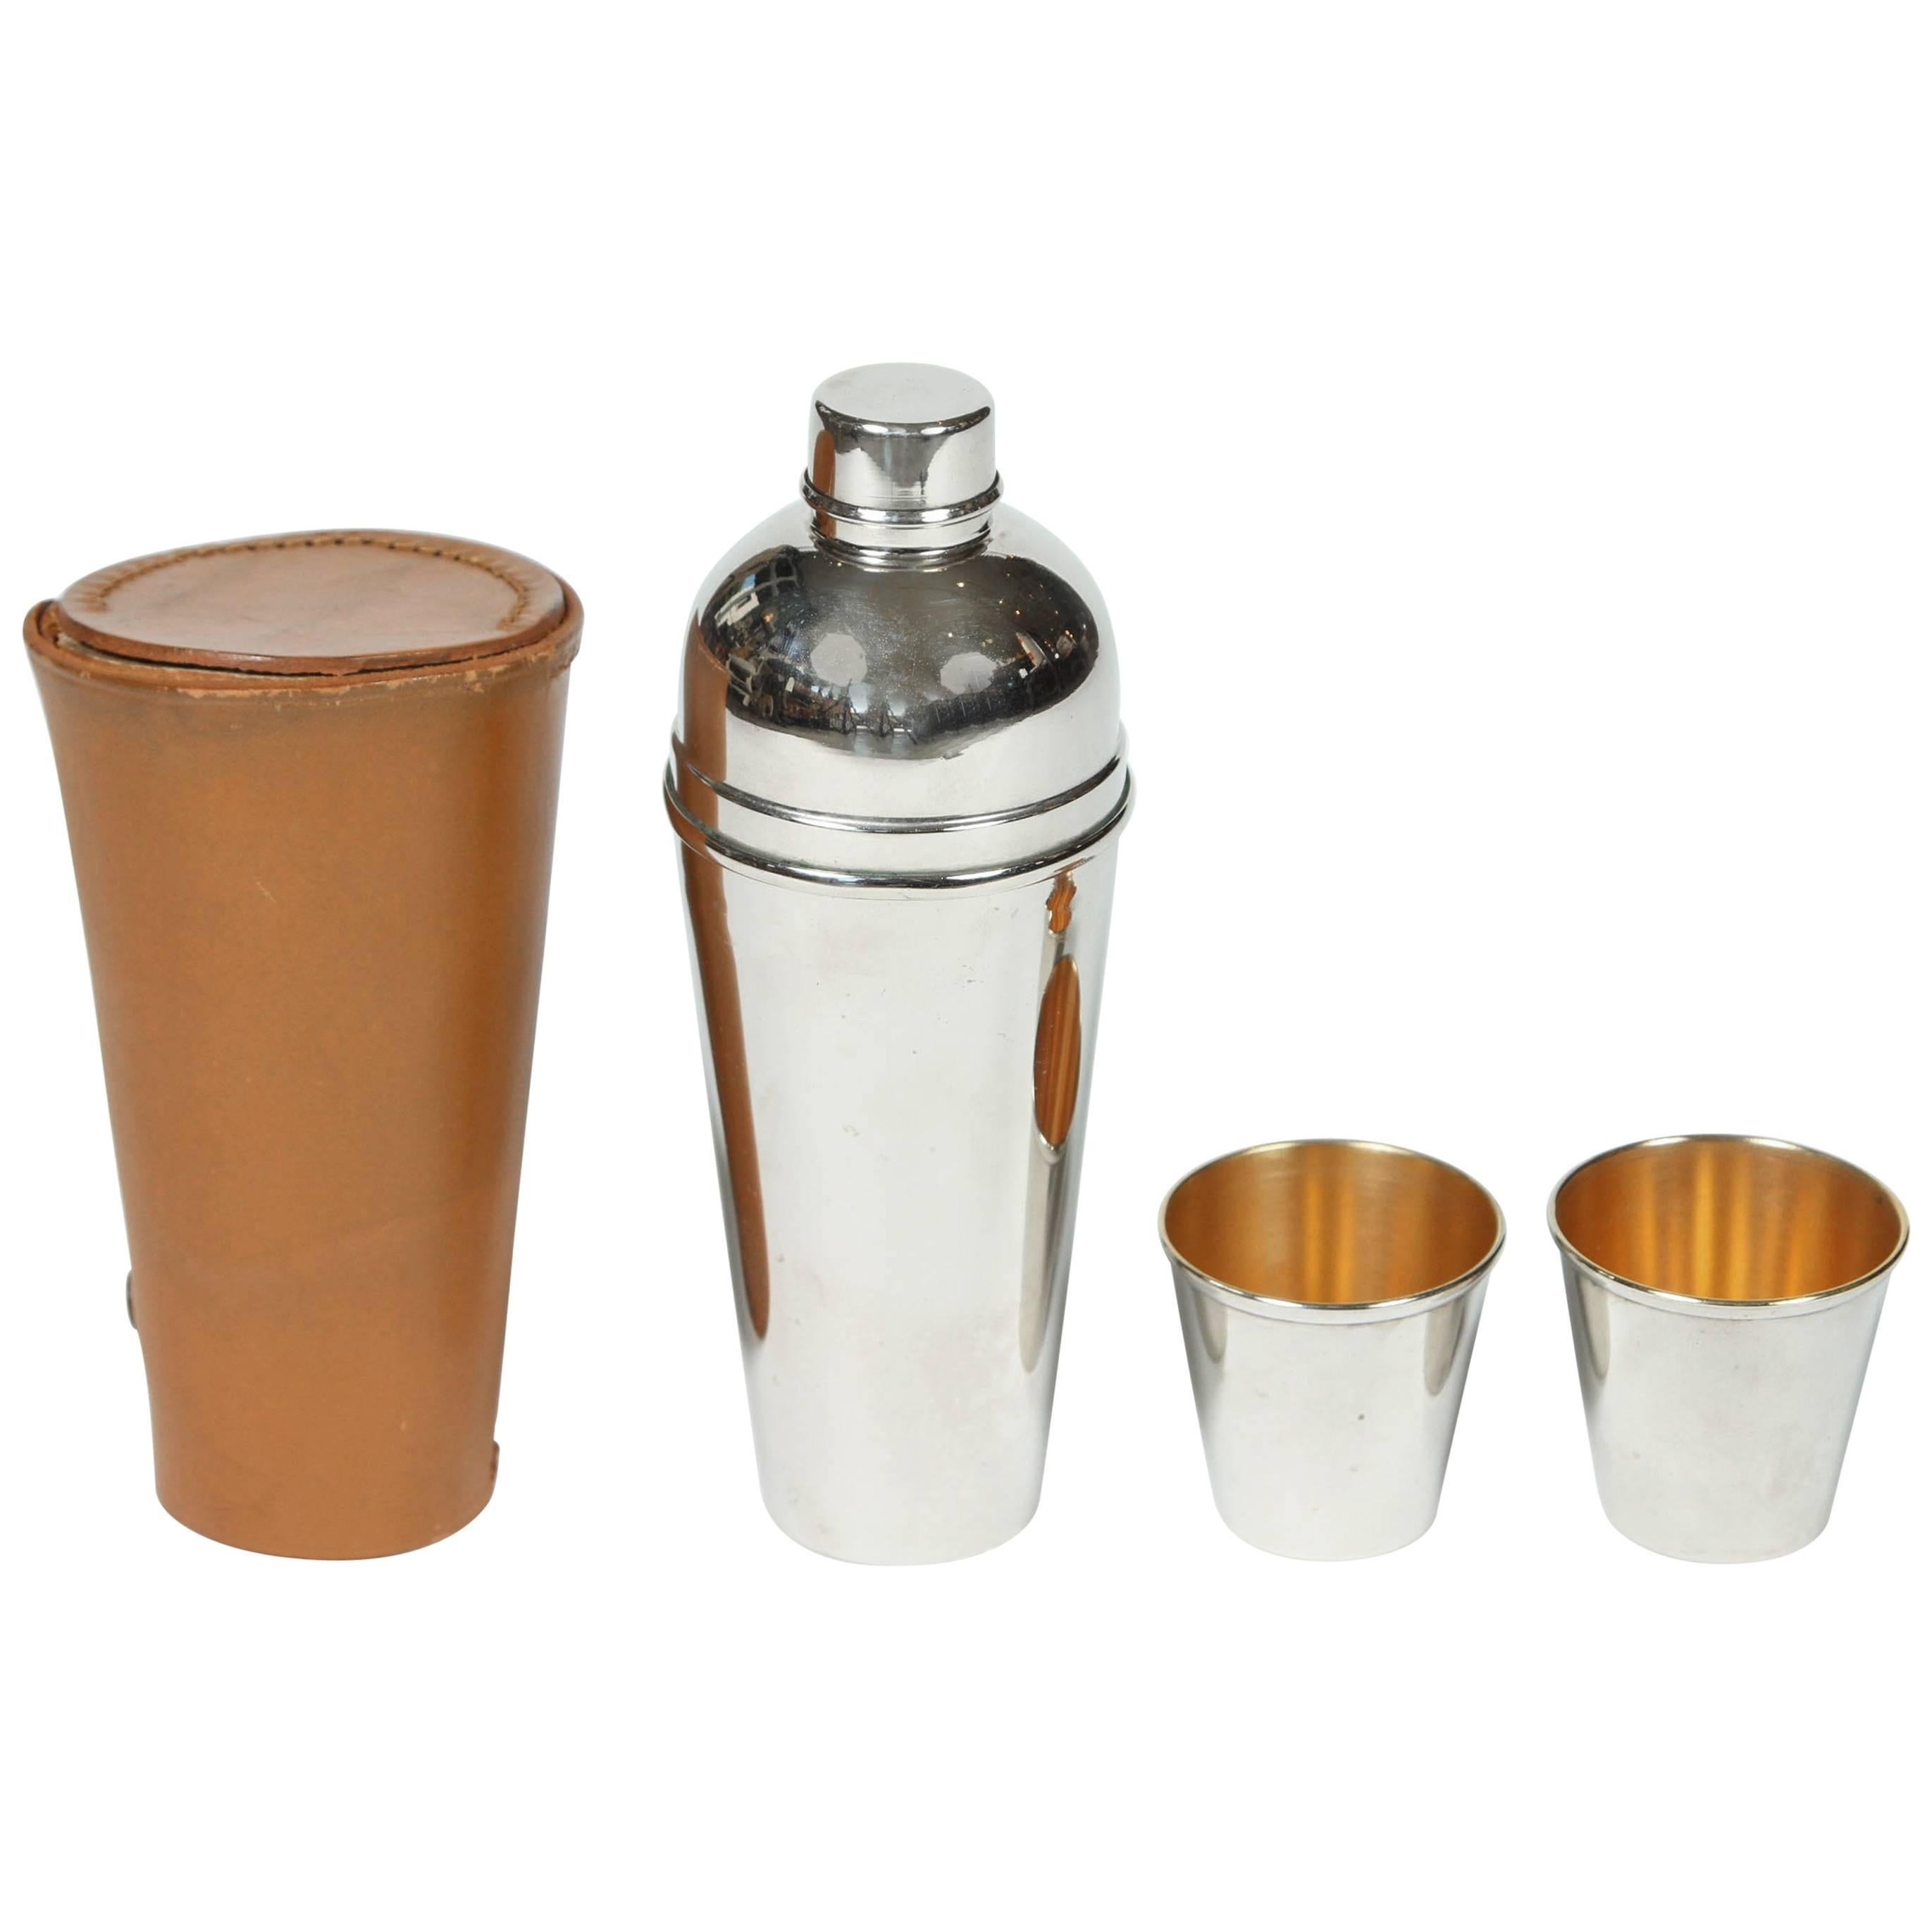 Vintage Travel Cocktail Shaker with Cups